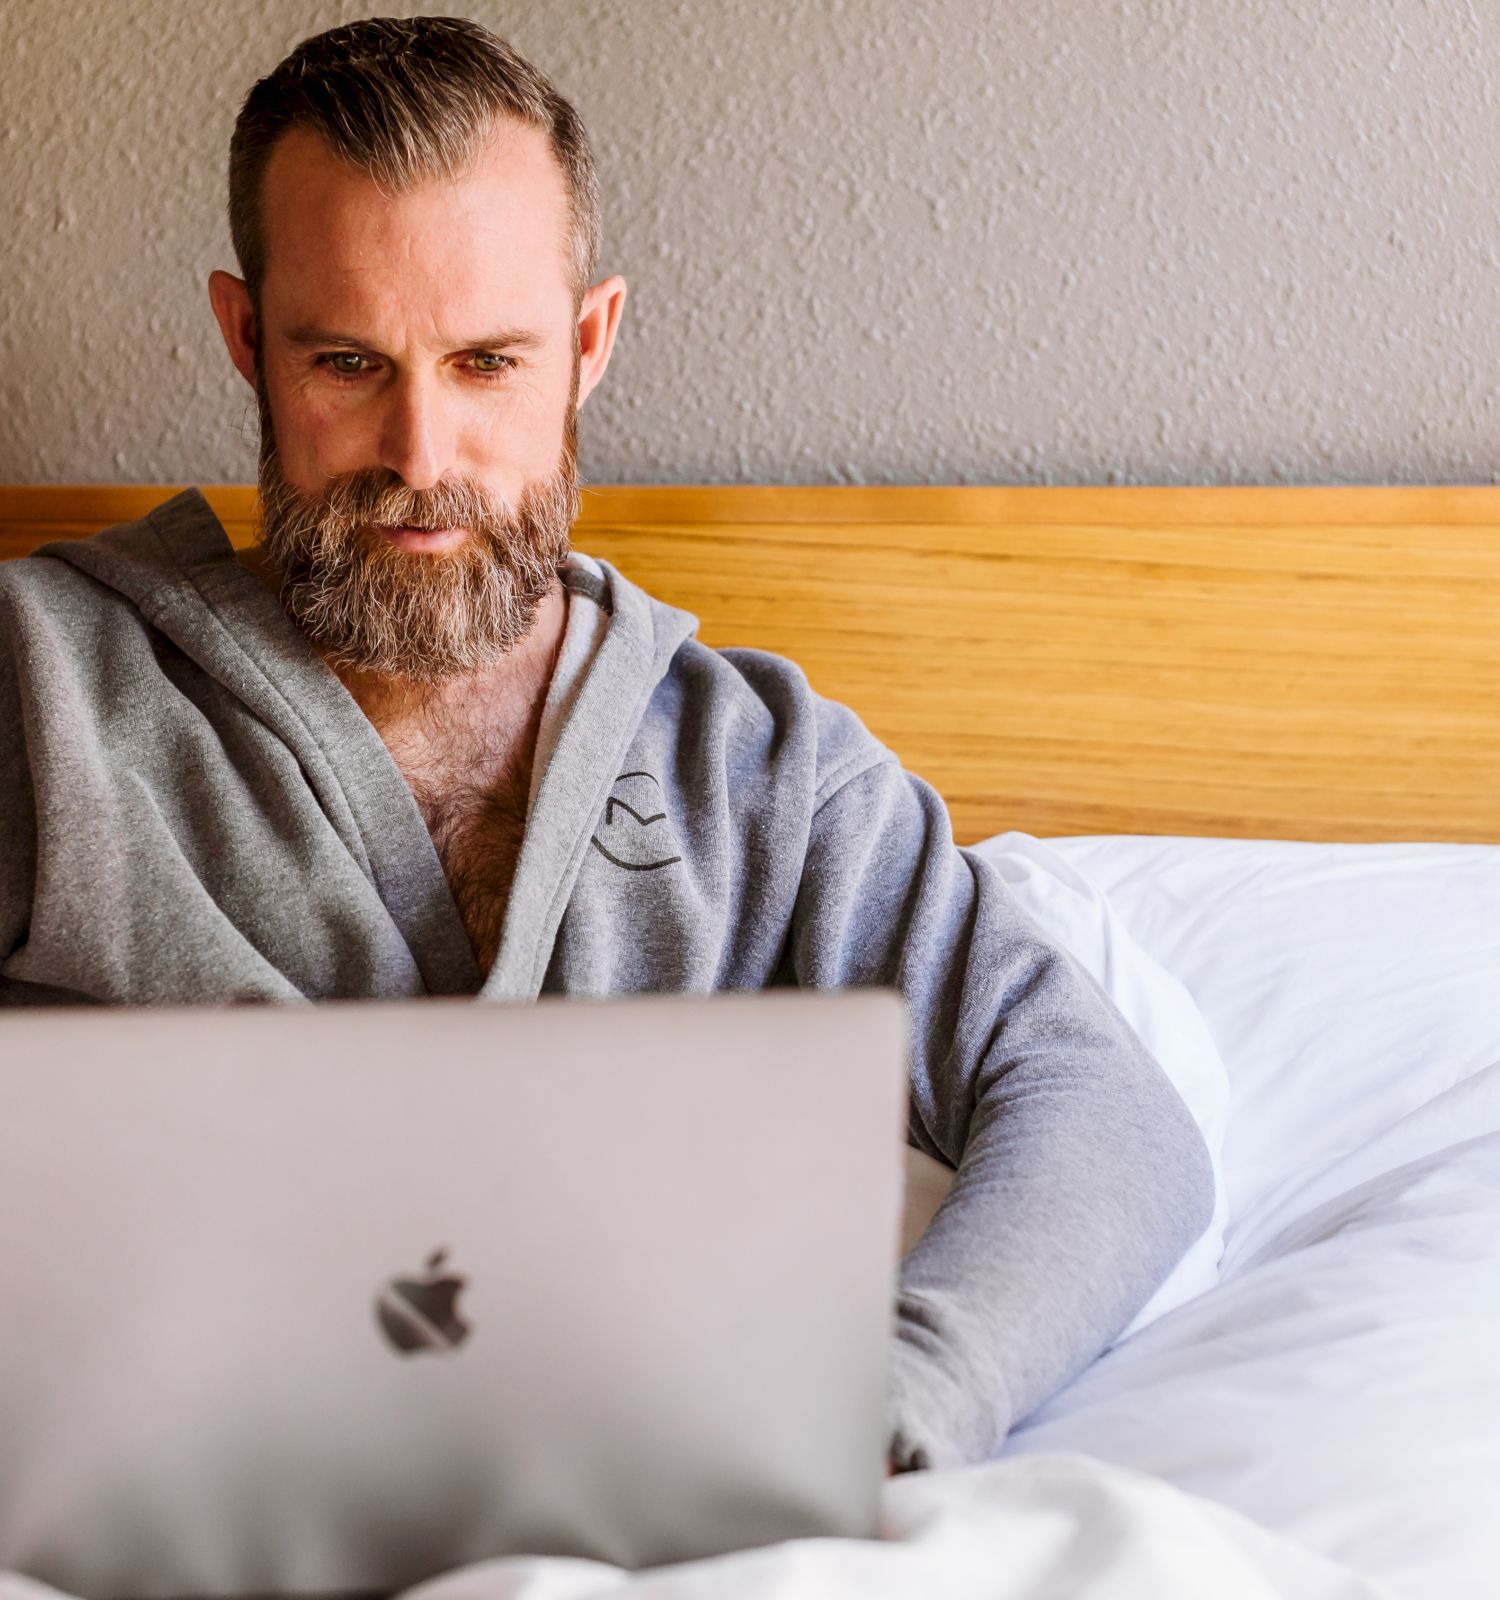 A bearded person is sitting in bed, wearing a gray robe, and using a silver laptop. The background shows a beige wall and a wooden bed headboard.